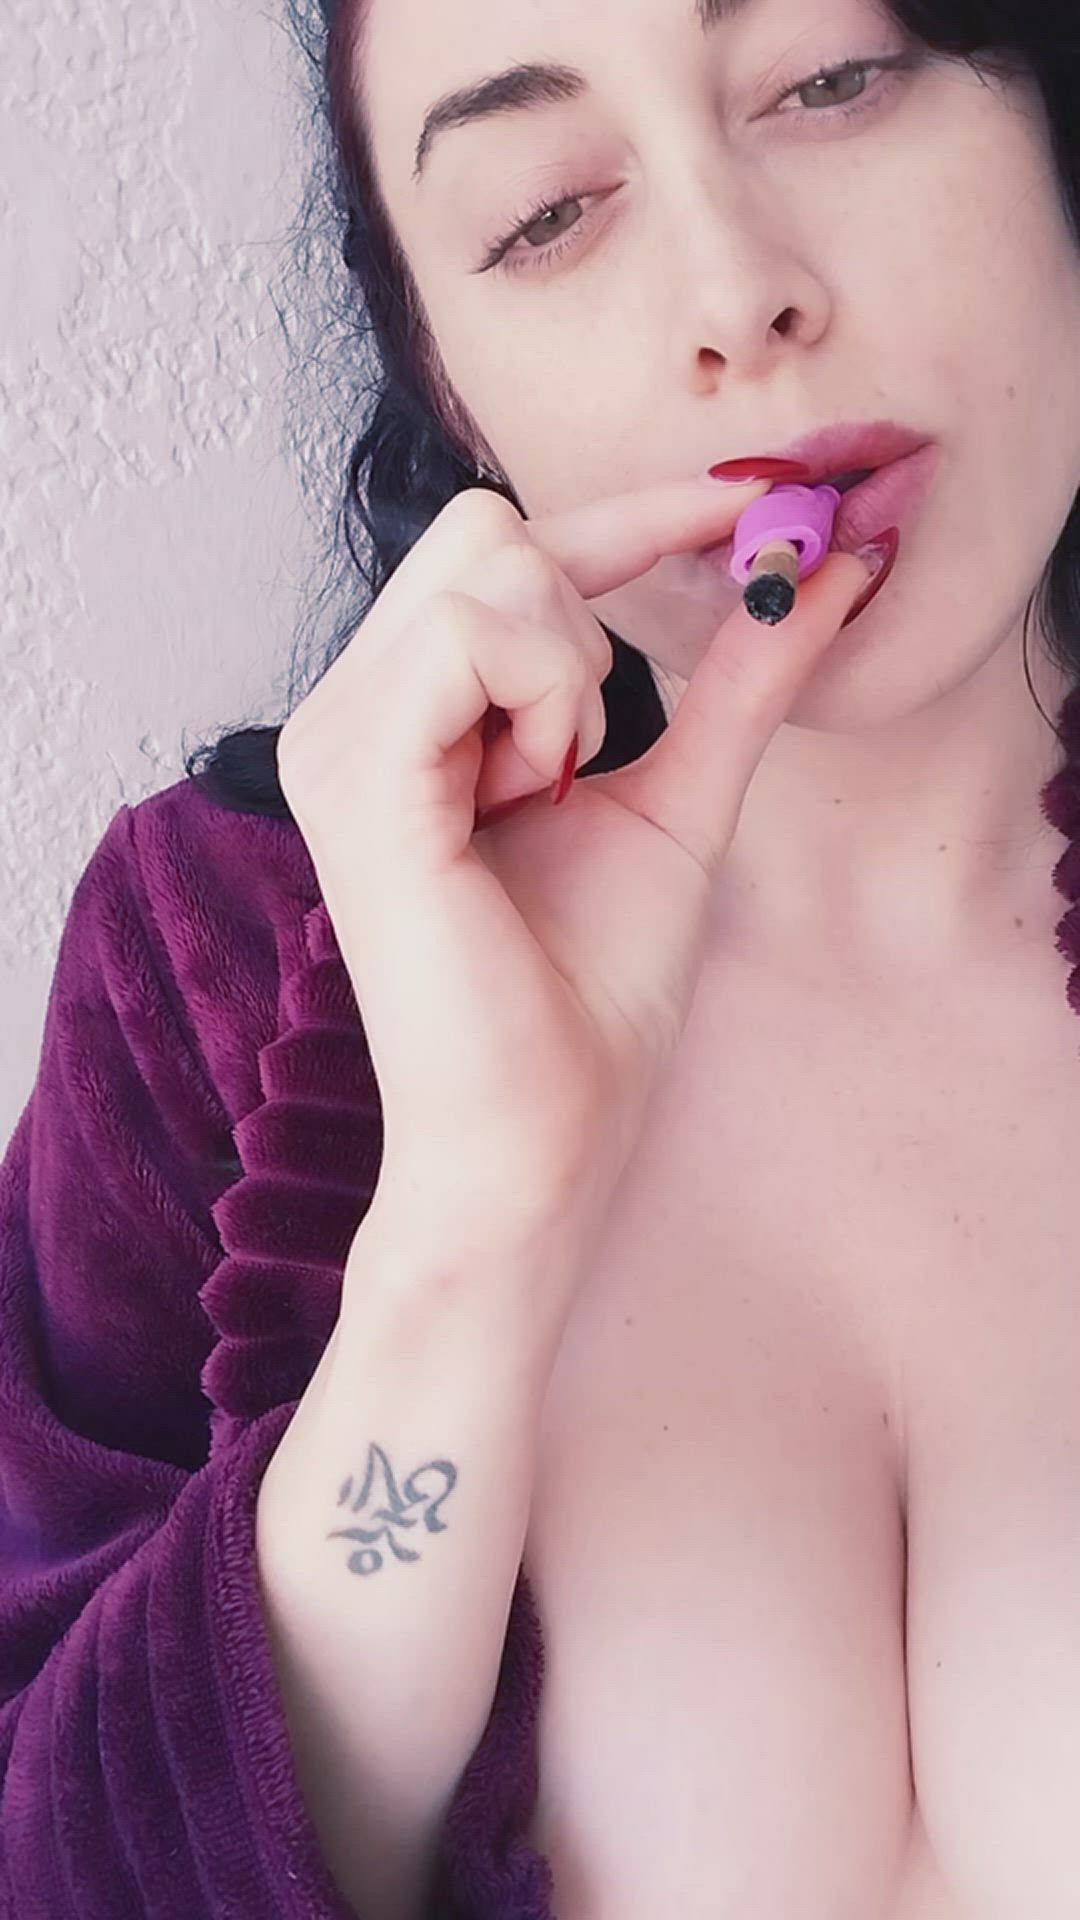 Big Tits porn video with onlyfans model taybbygrlx <strong>@taybbygrlx</strong>